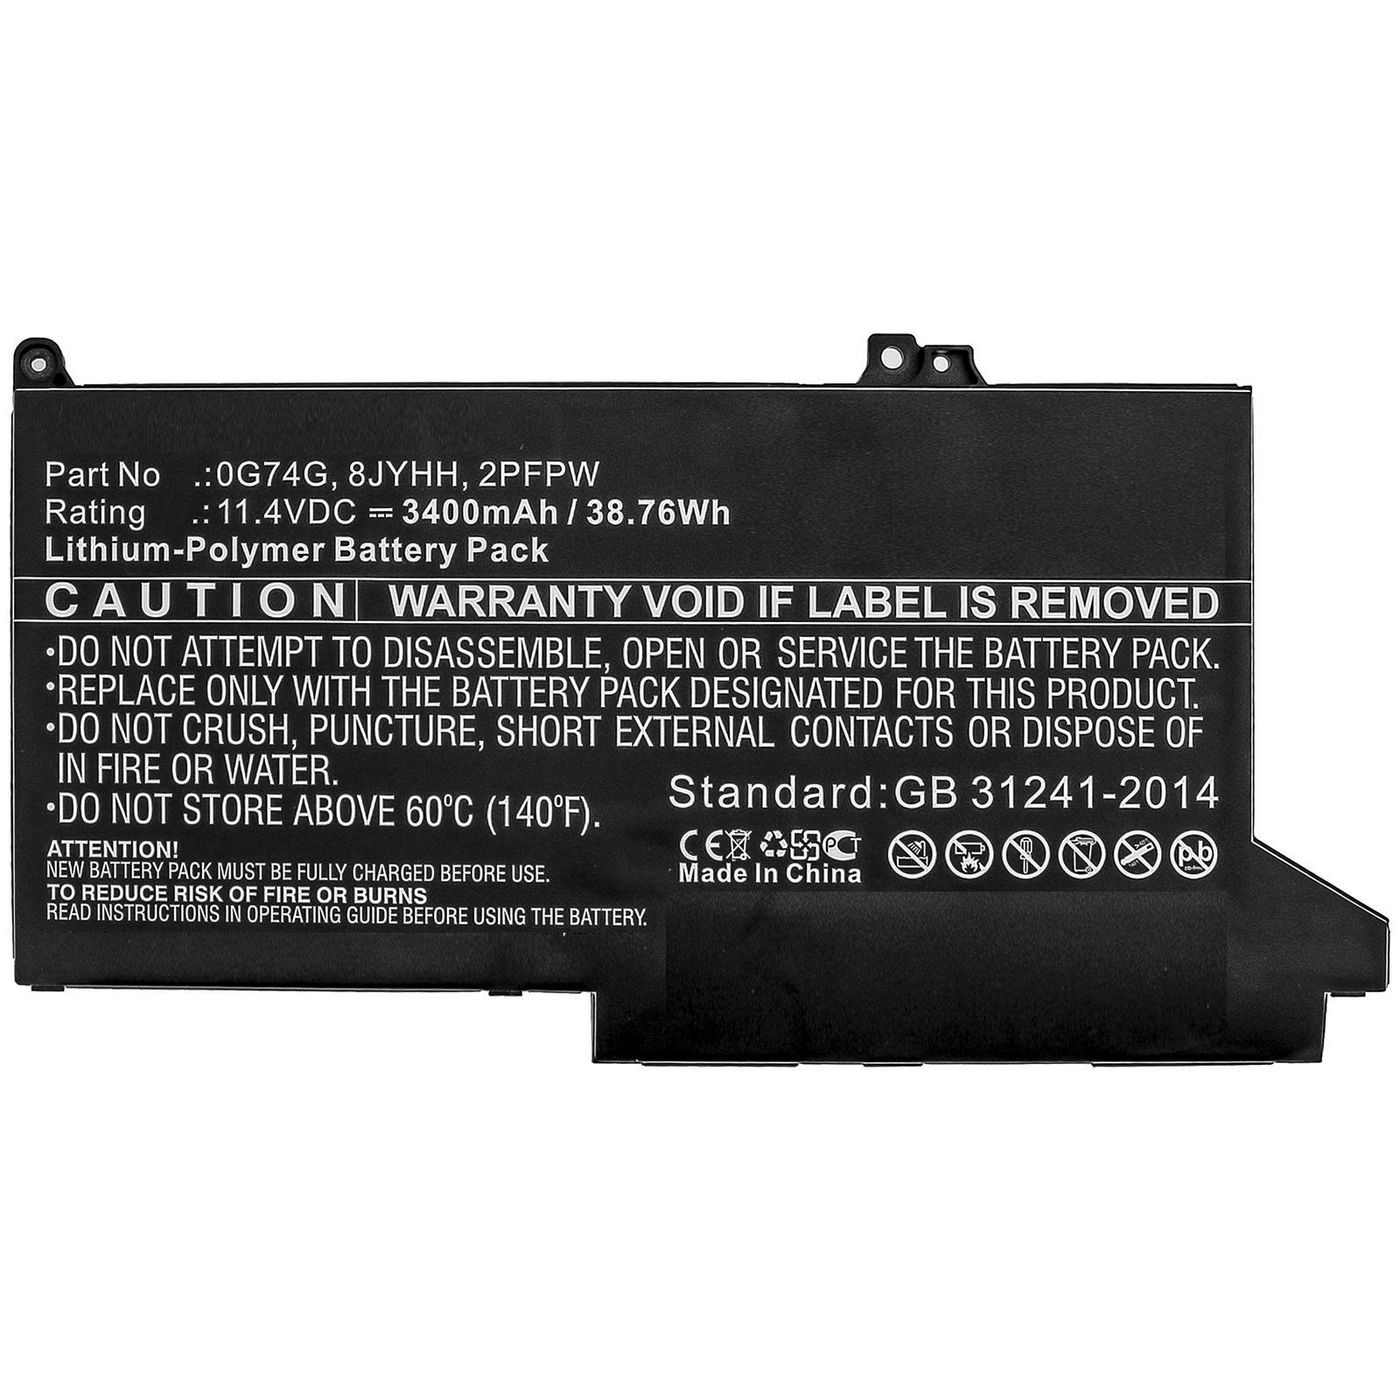 CoreParts MBXDE-BA0238 W126385607 Laptop Battery for Dell 